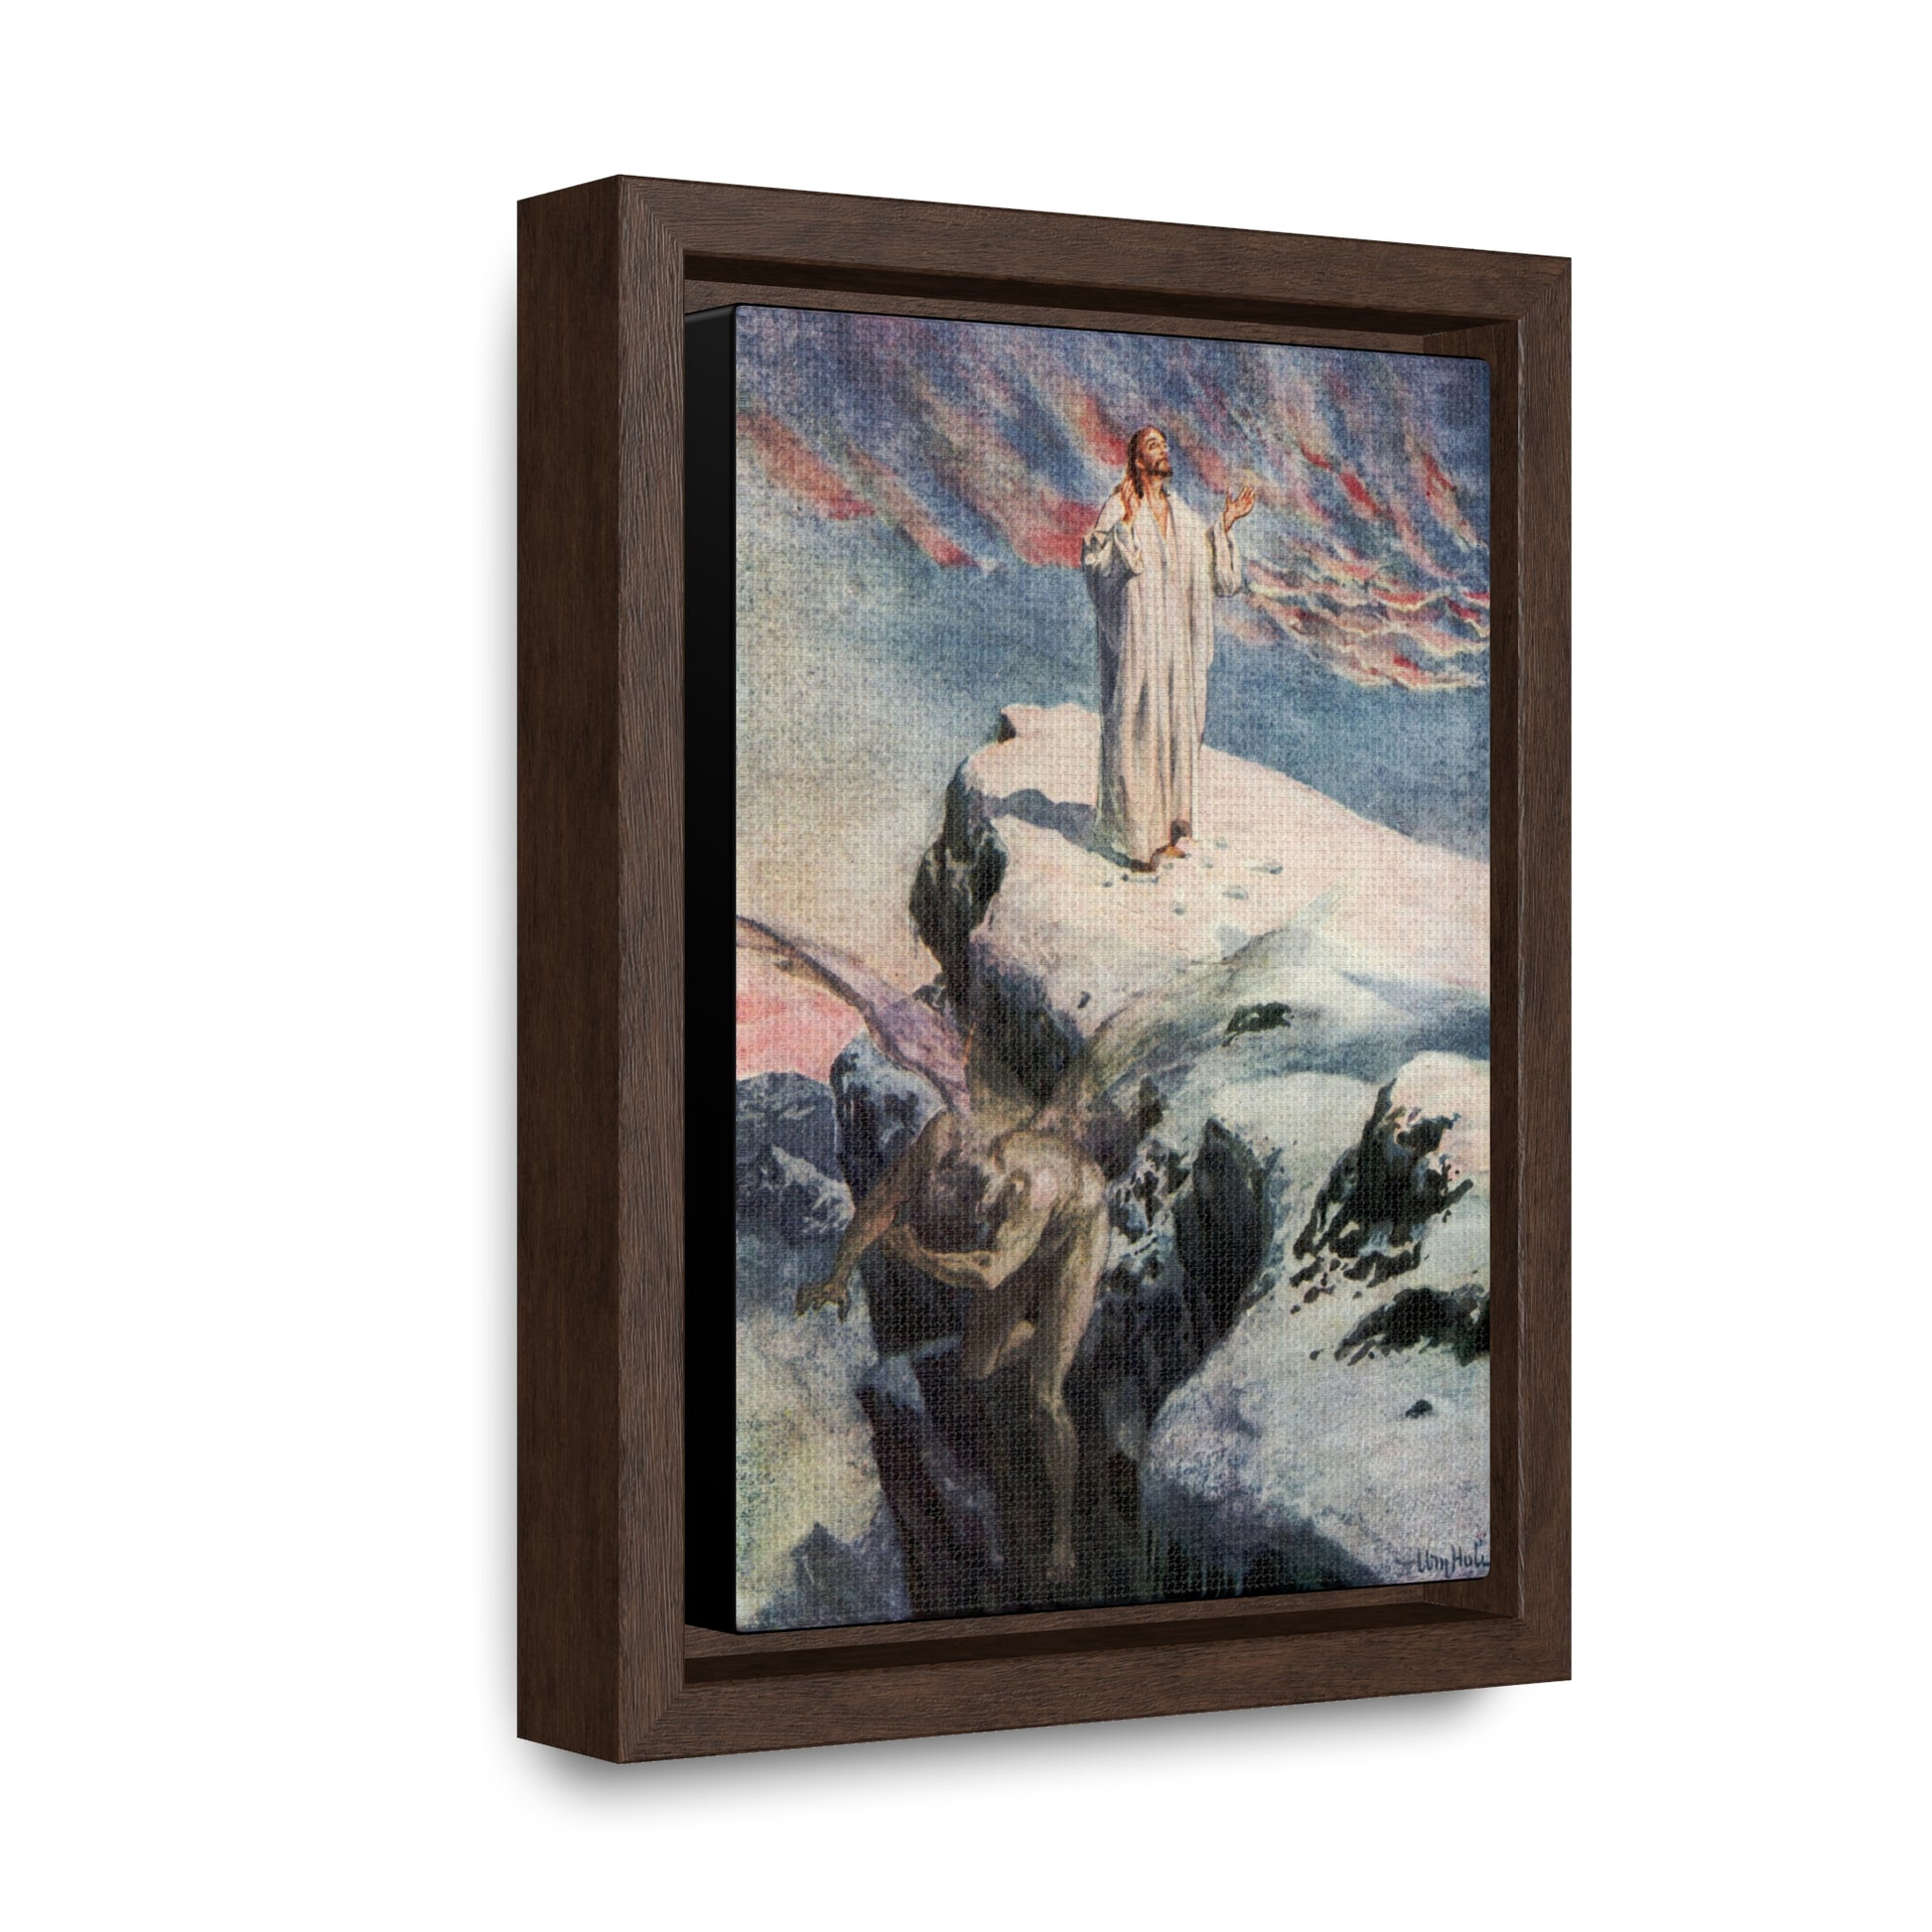 The Temptation of Jesus Framed, Gallery Canvas Wrap - 5"x7" - Studio Lams Creative Collective